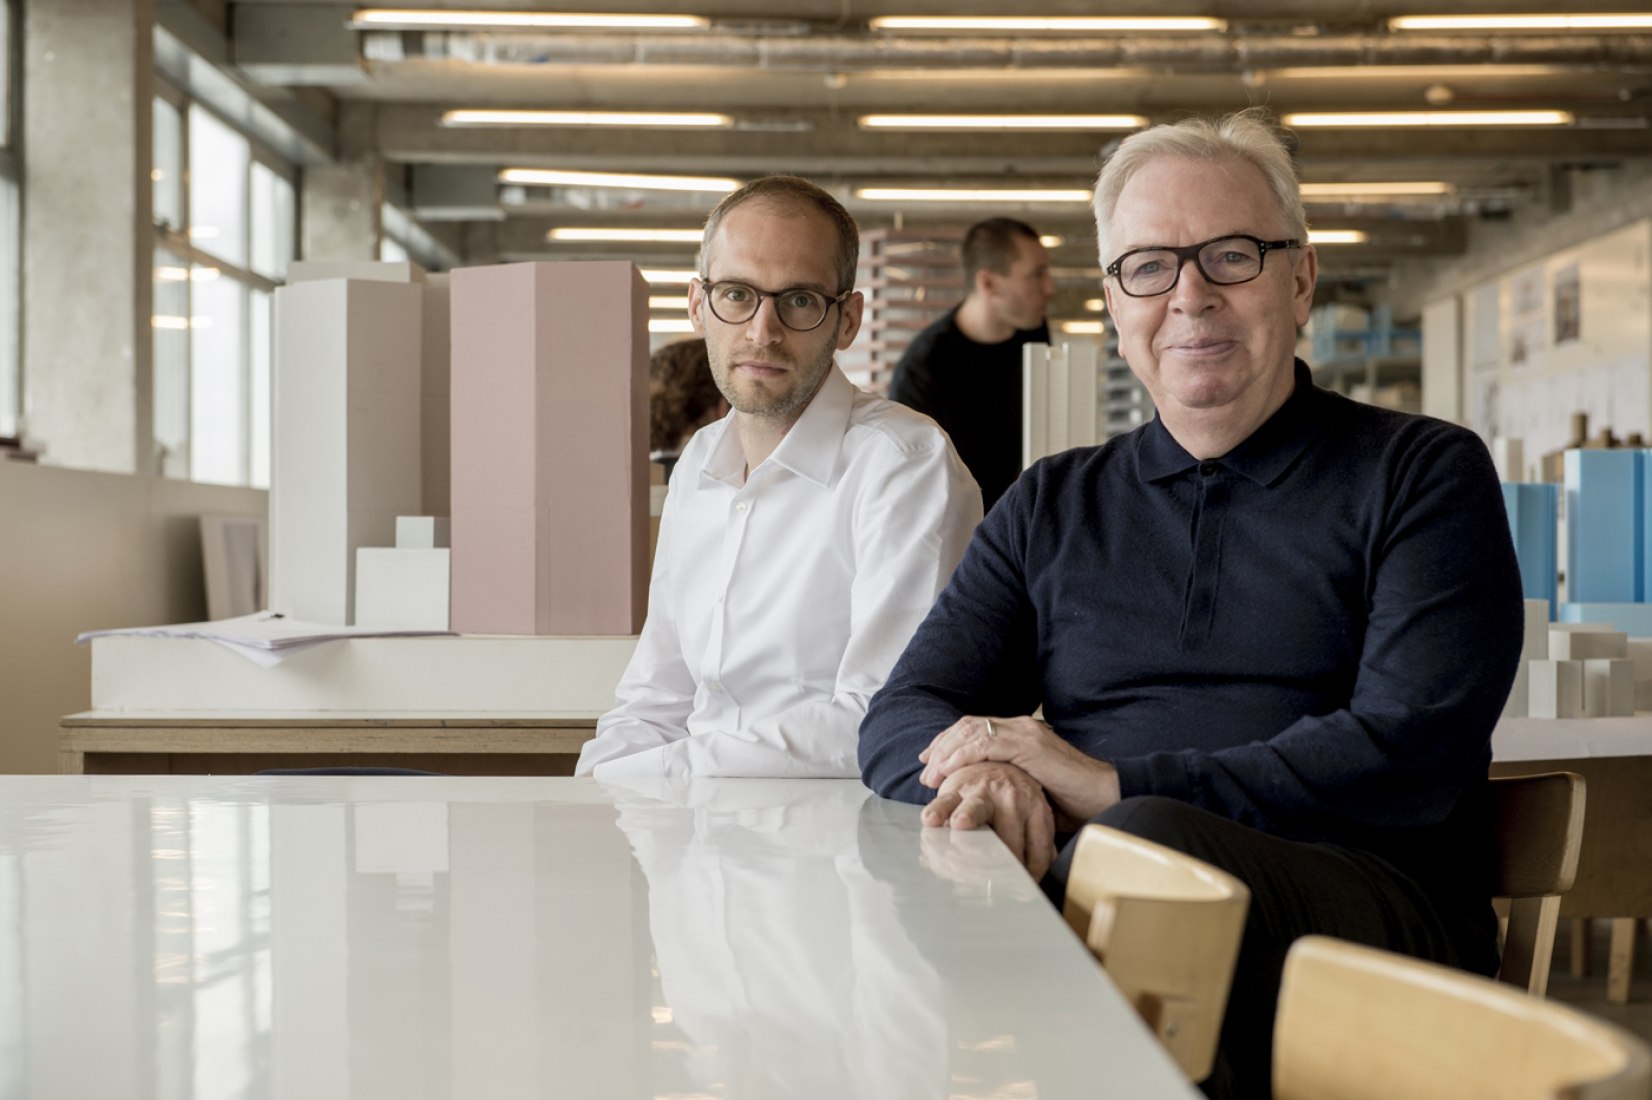 SIMON KRETZ selected by DAVID CHIPPERFIELD in the Rolex 